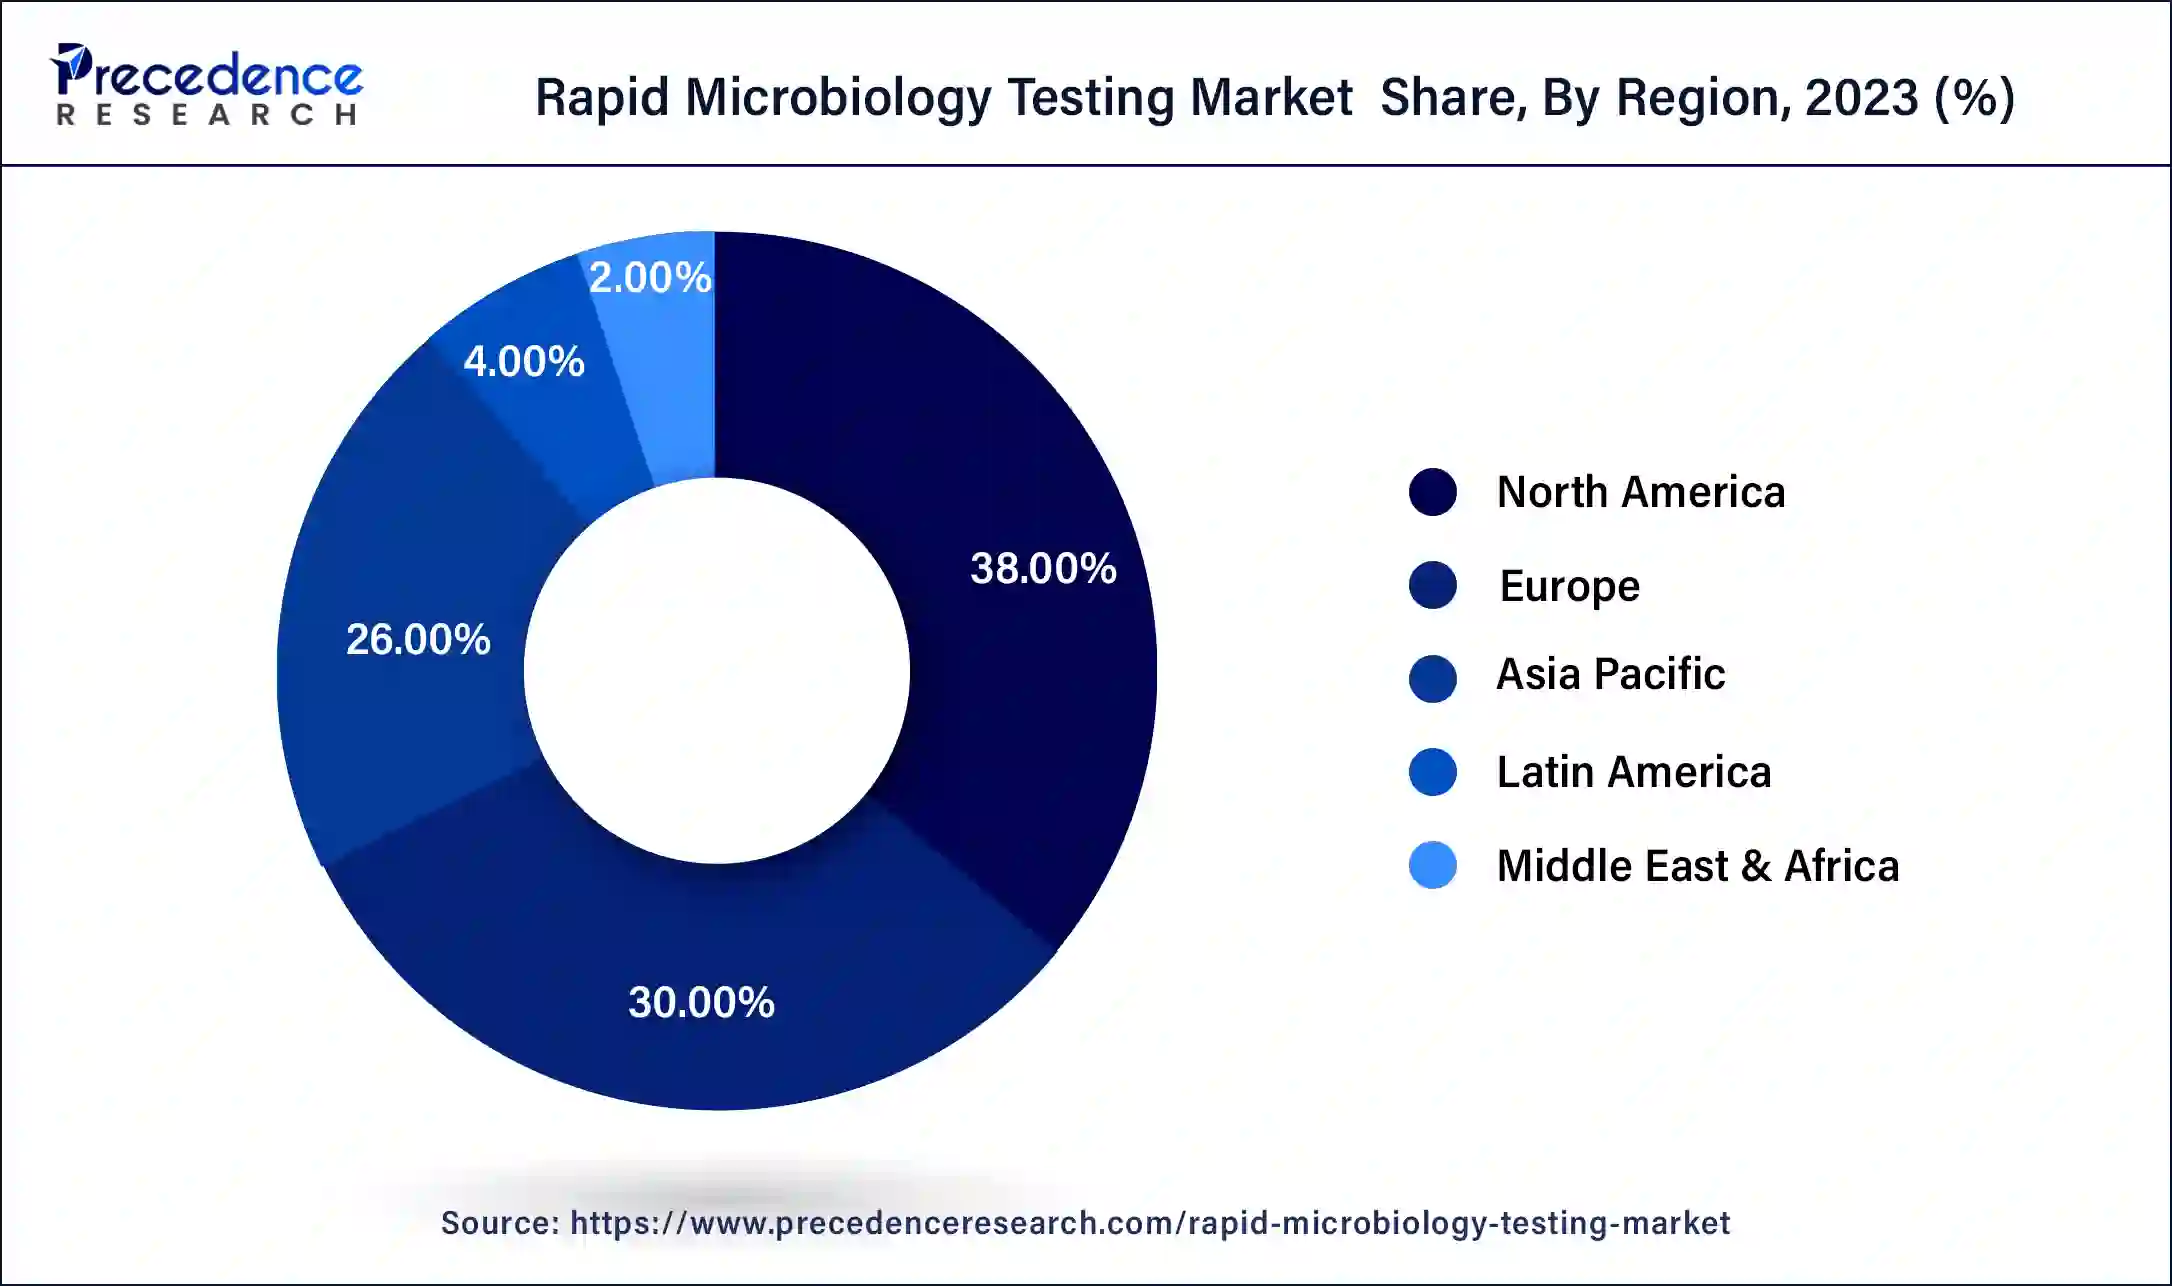 Rapid Microbiology Testing Market Share, By Region, 2023 (%)